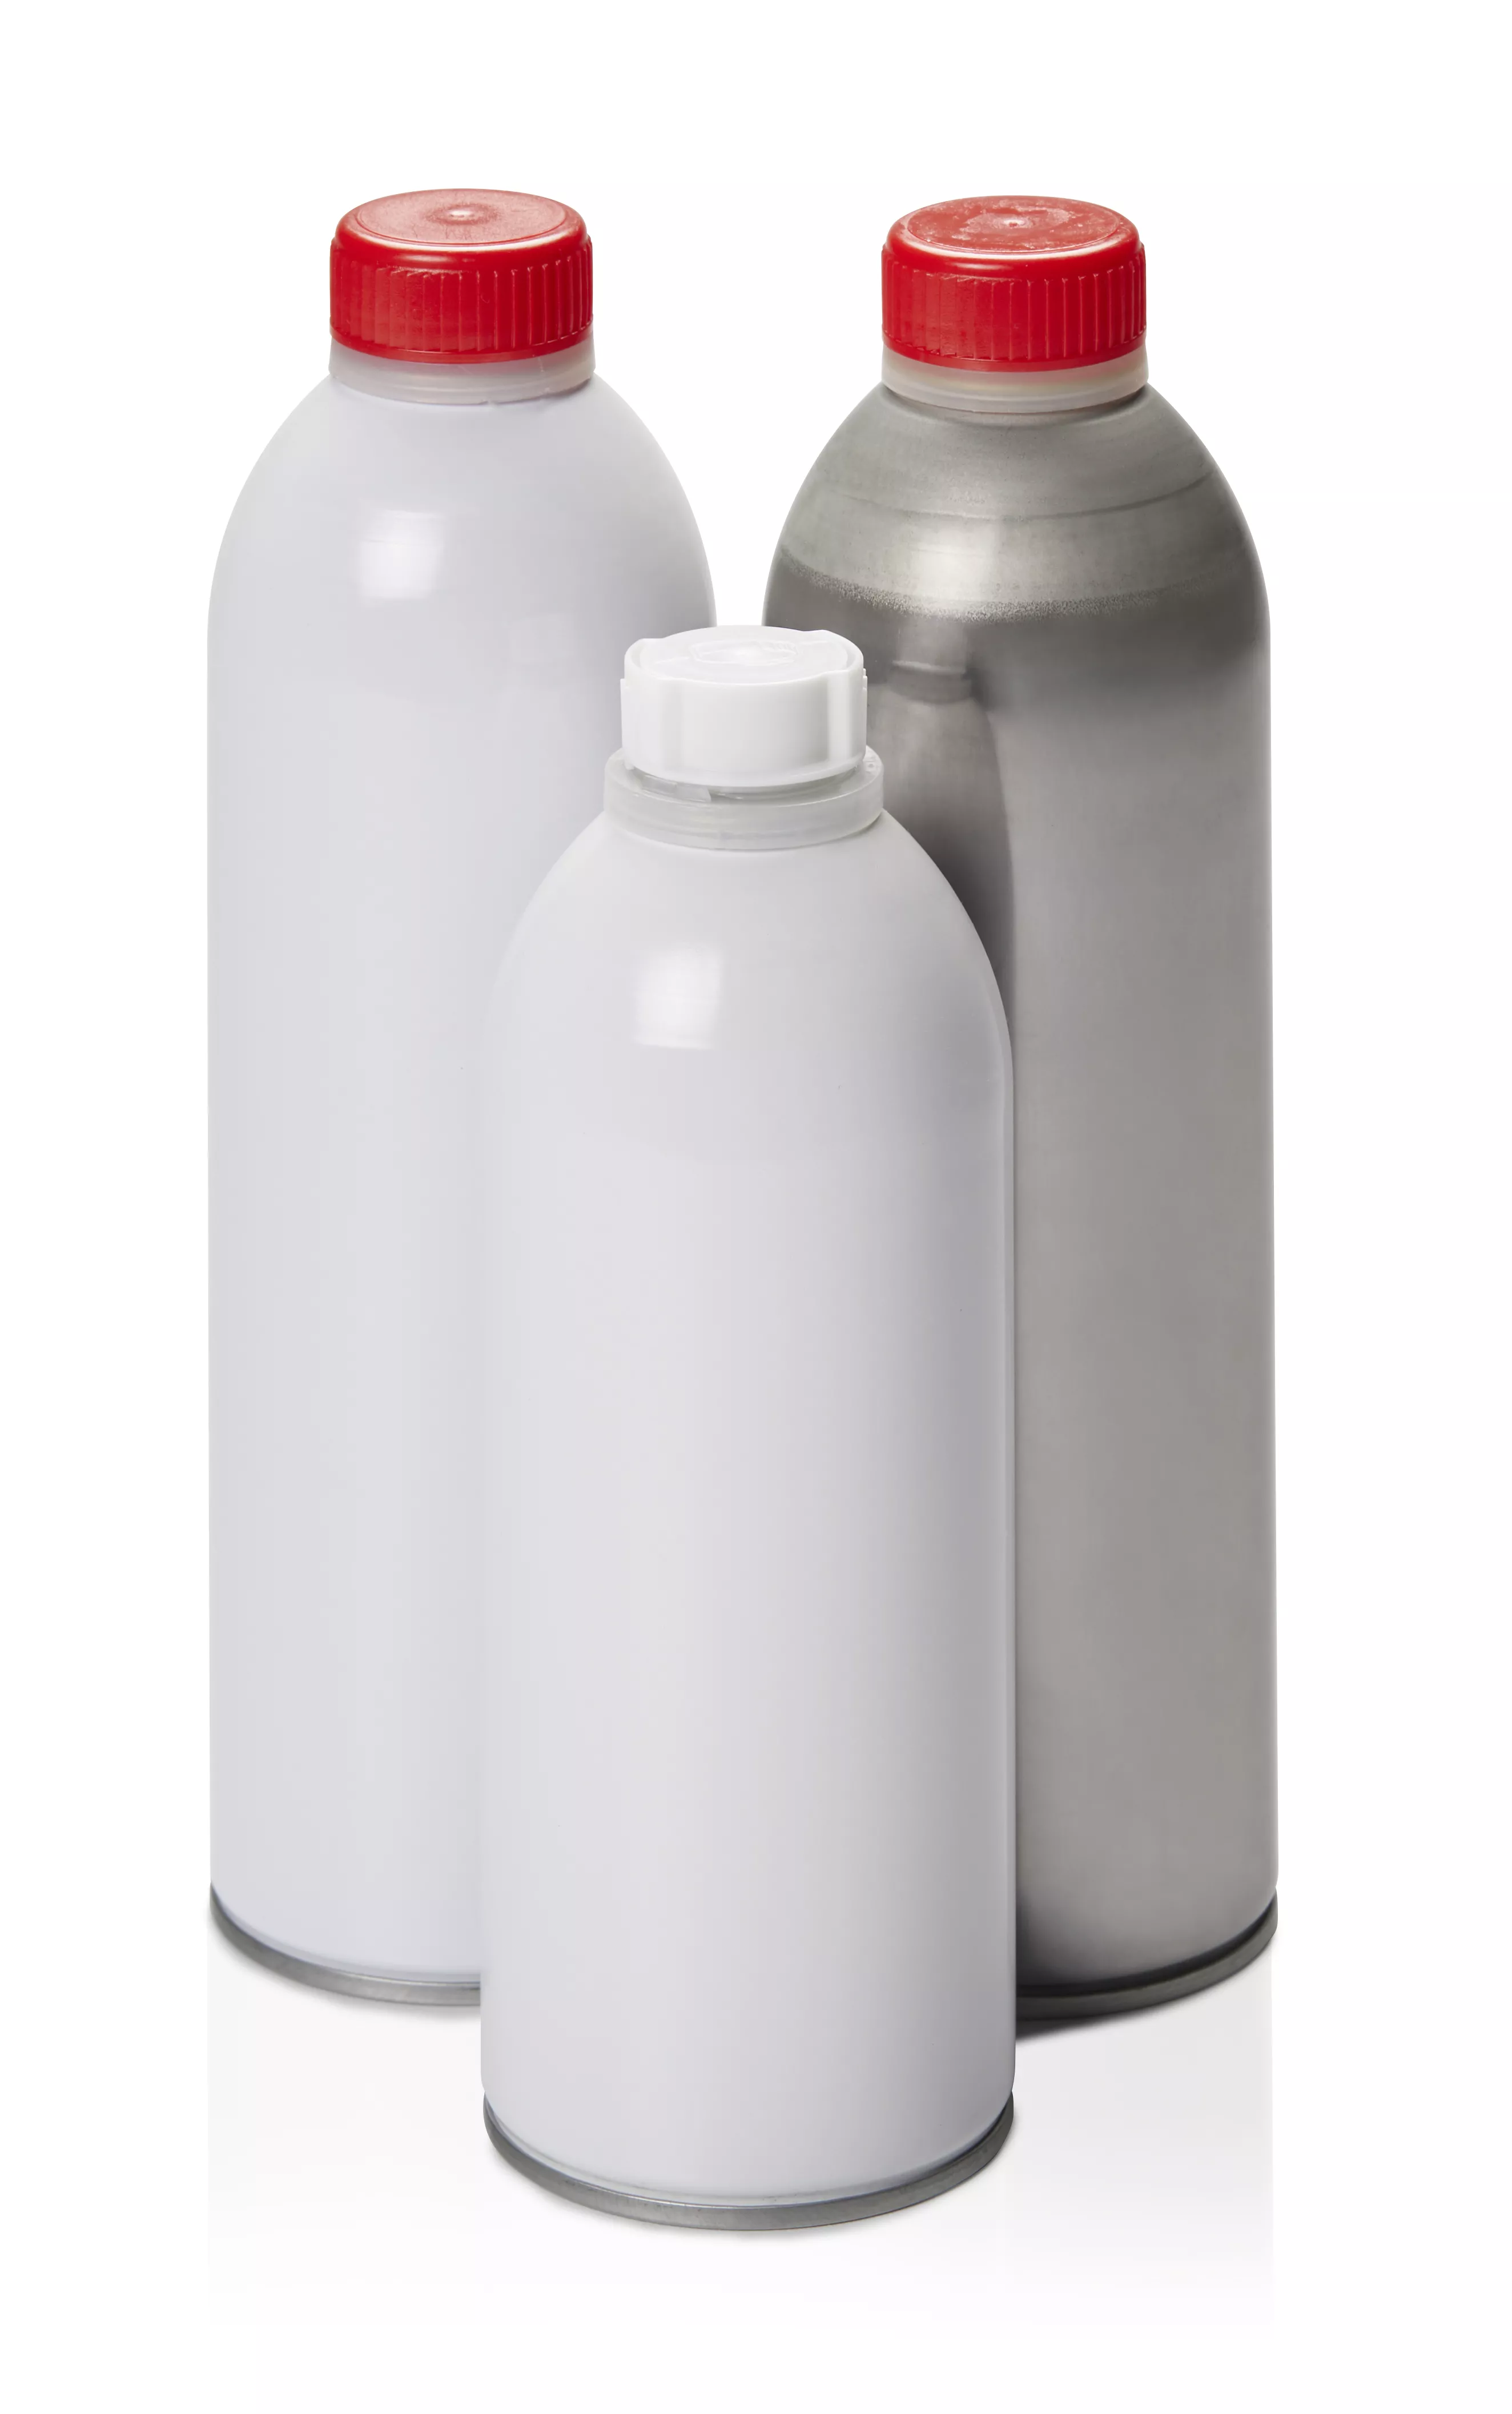 Image of two-piece aerosol cans